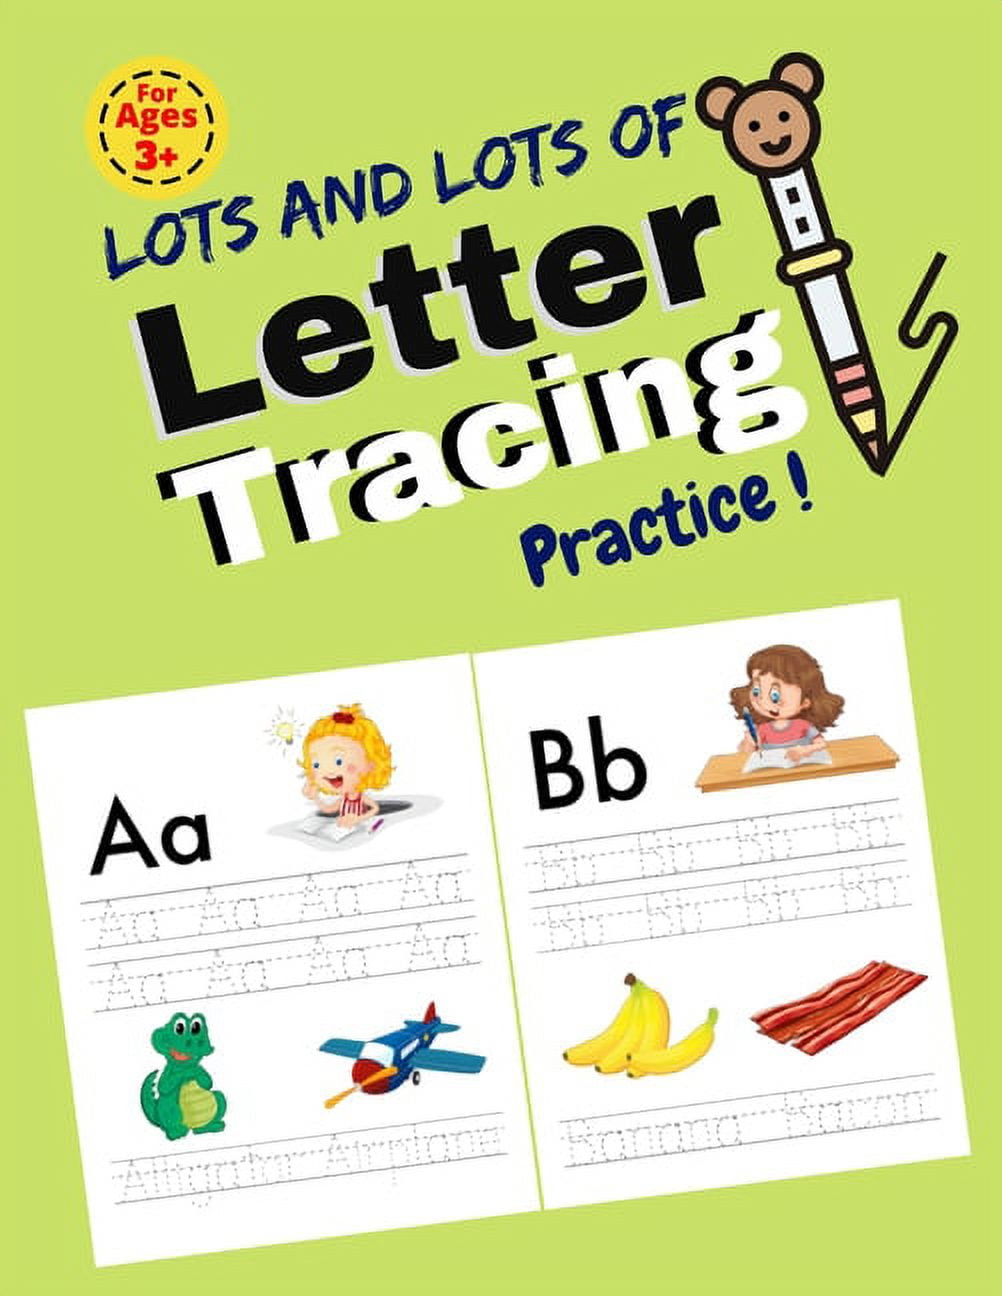 Letter Tracing Book For Preschoolers: Lots And Lots Of Letter